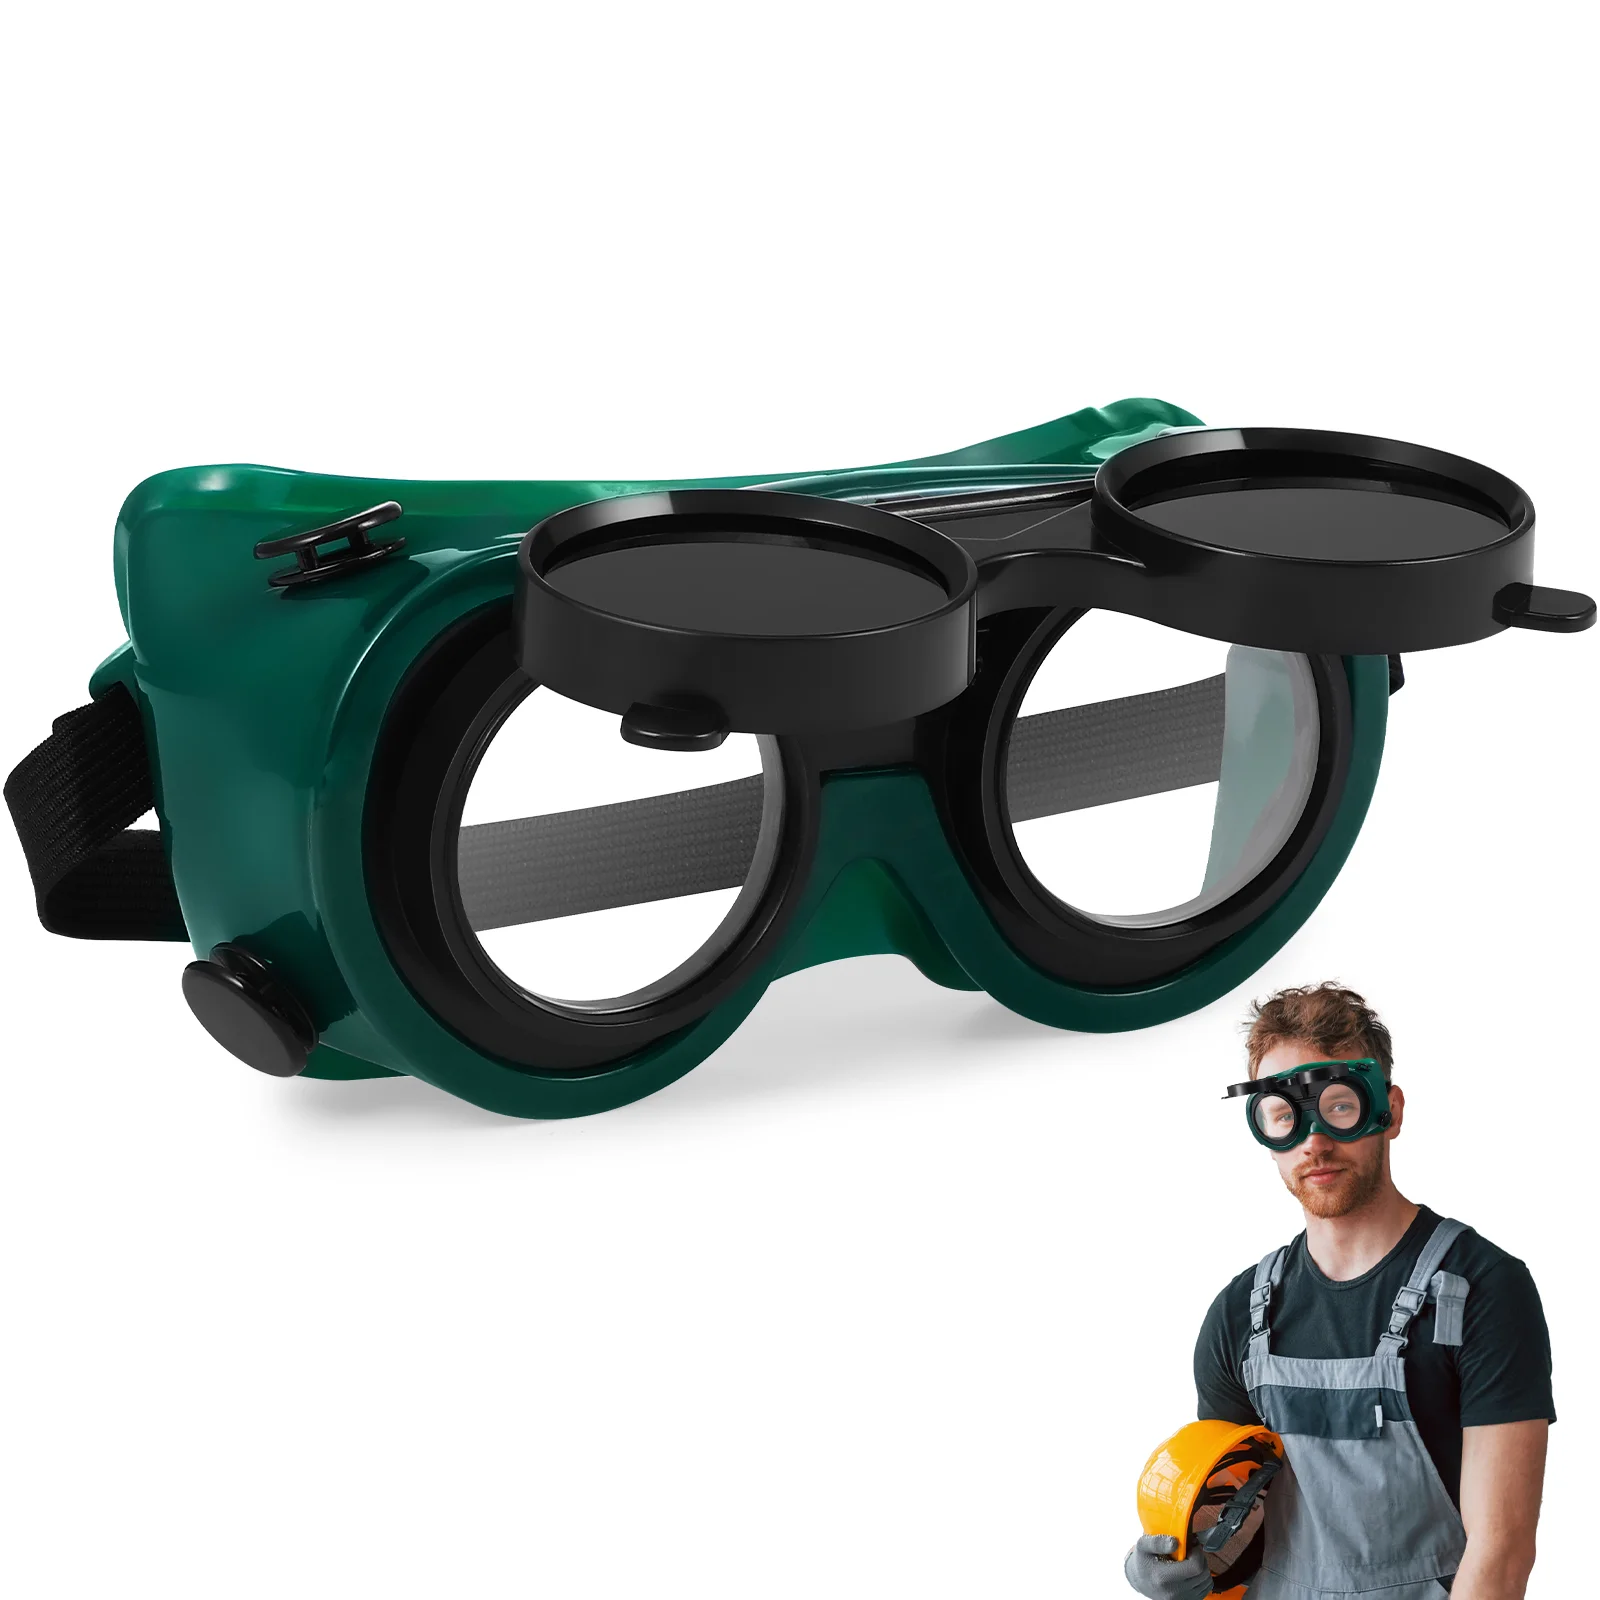 

Anti-Glare Protective Welding With Flip Up Safety Protective Grinding Glasses Eclipse Kids Goggles Weld Accessories